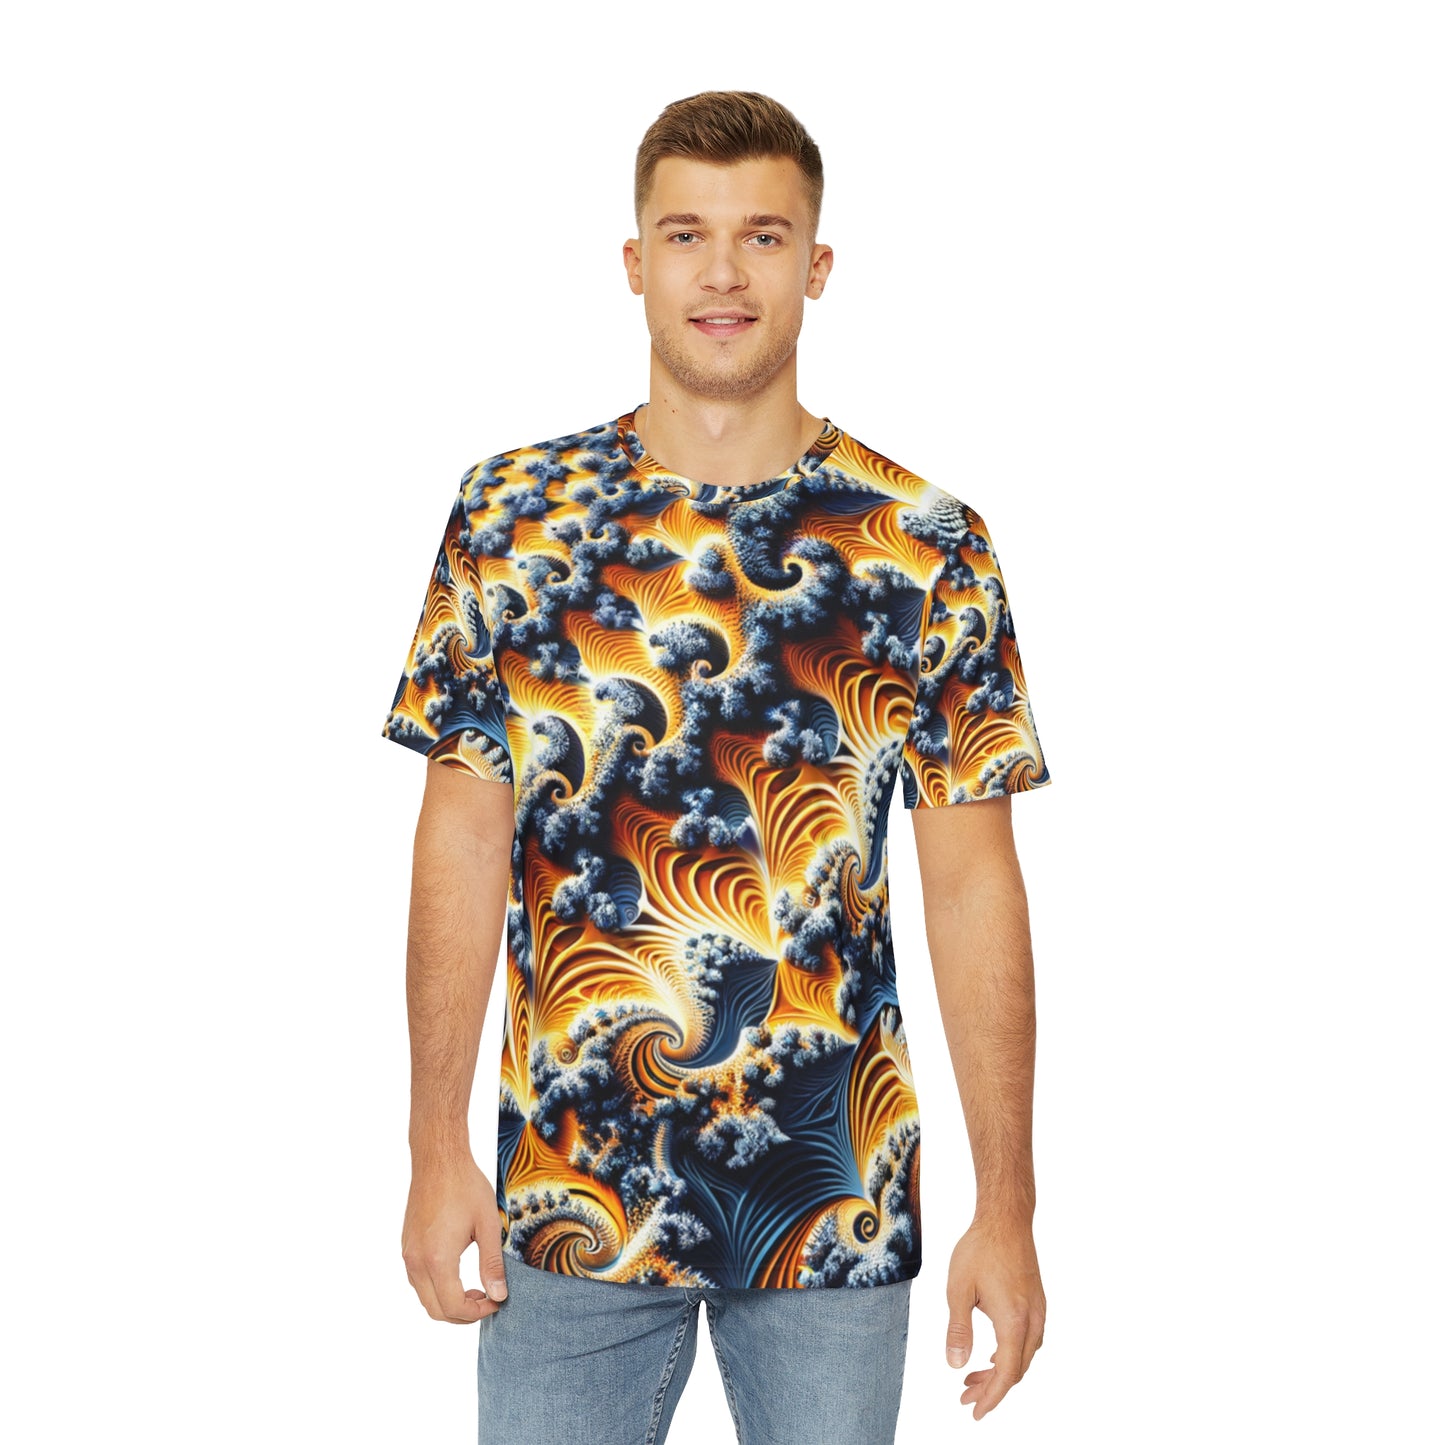 Front view of the Celestial Spirals & Waves Crewneck Pullover All-Over Print Short-Sleeved Shirt yellow blue black white orange celestial pattern paired with casual denim pants worn by a white man